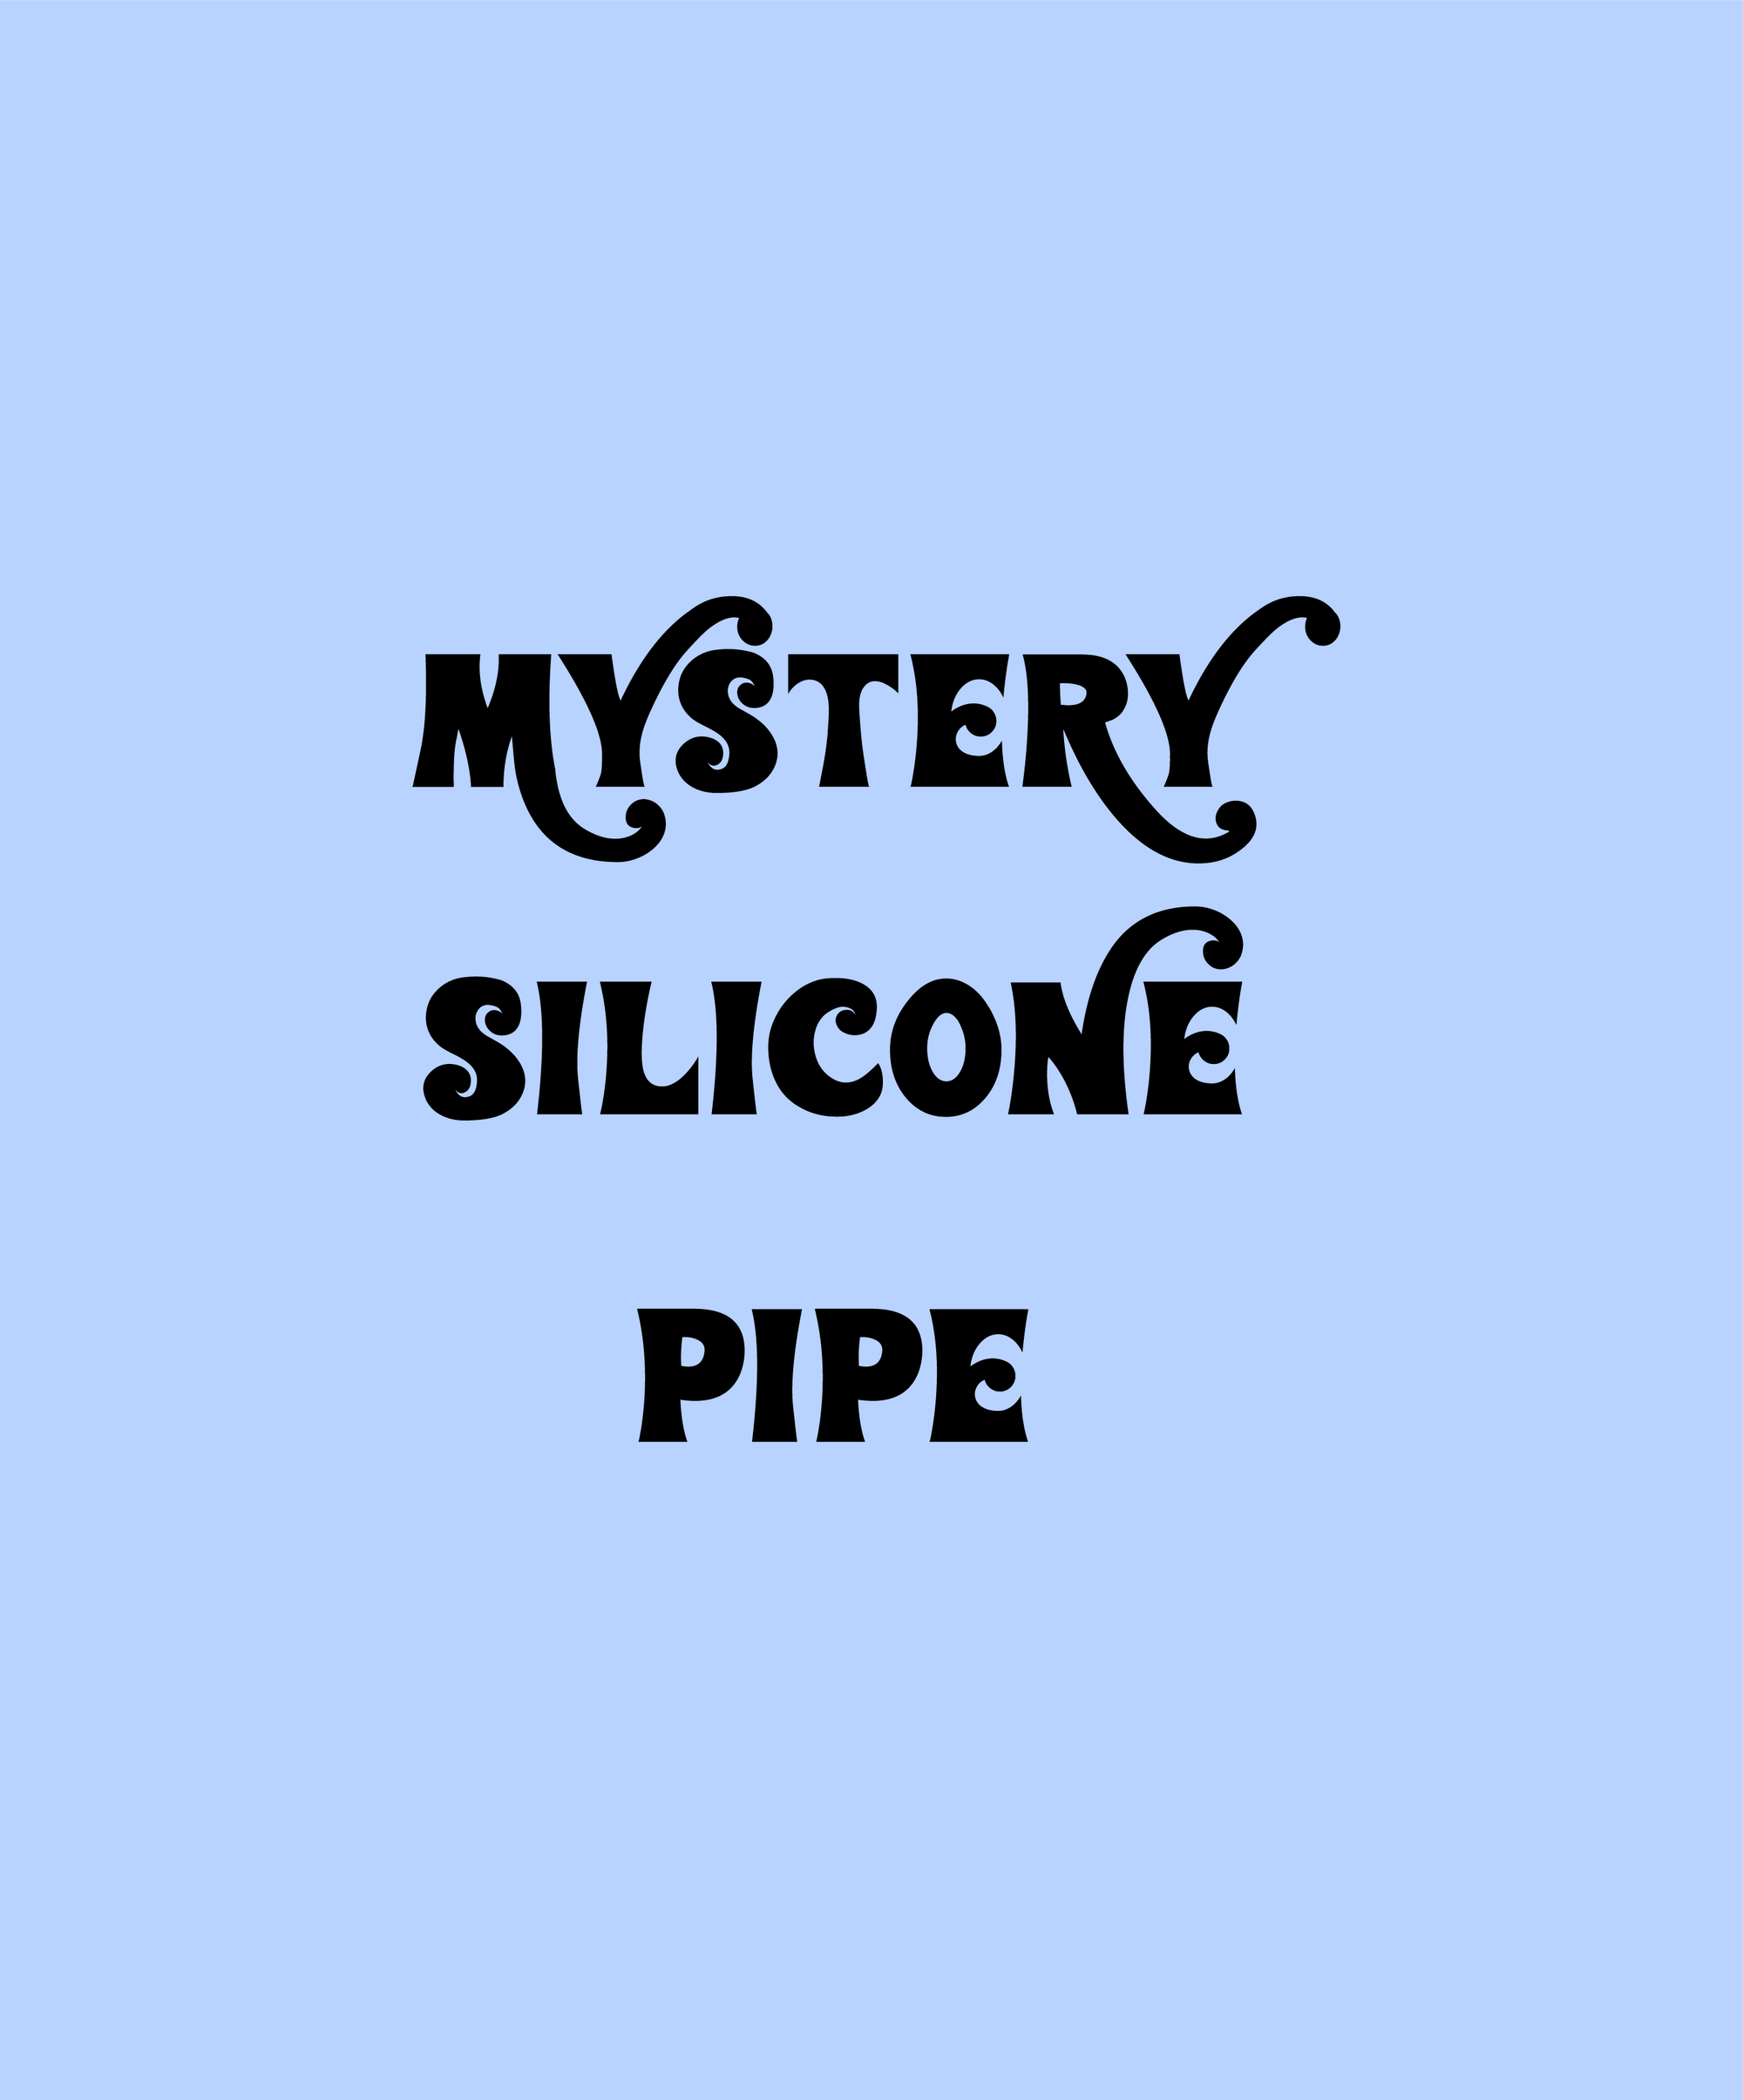 MYSTERY SILICONE PIPE!